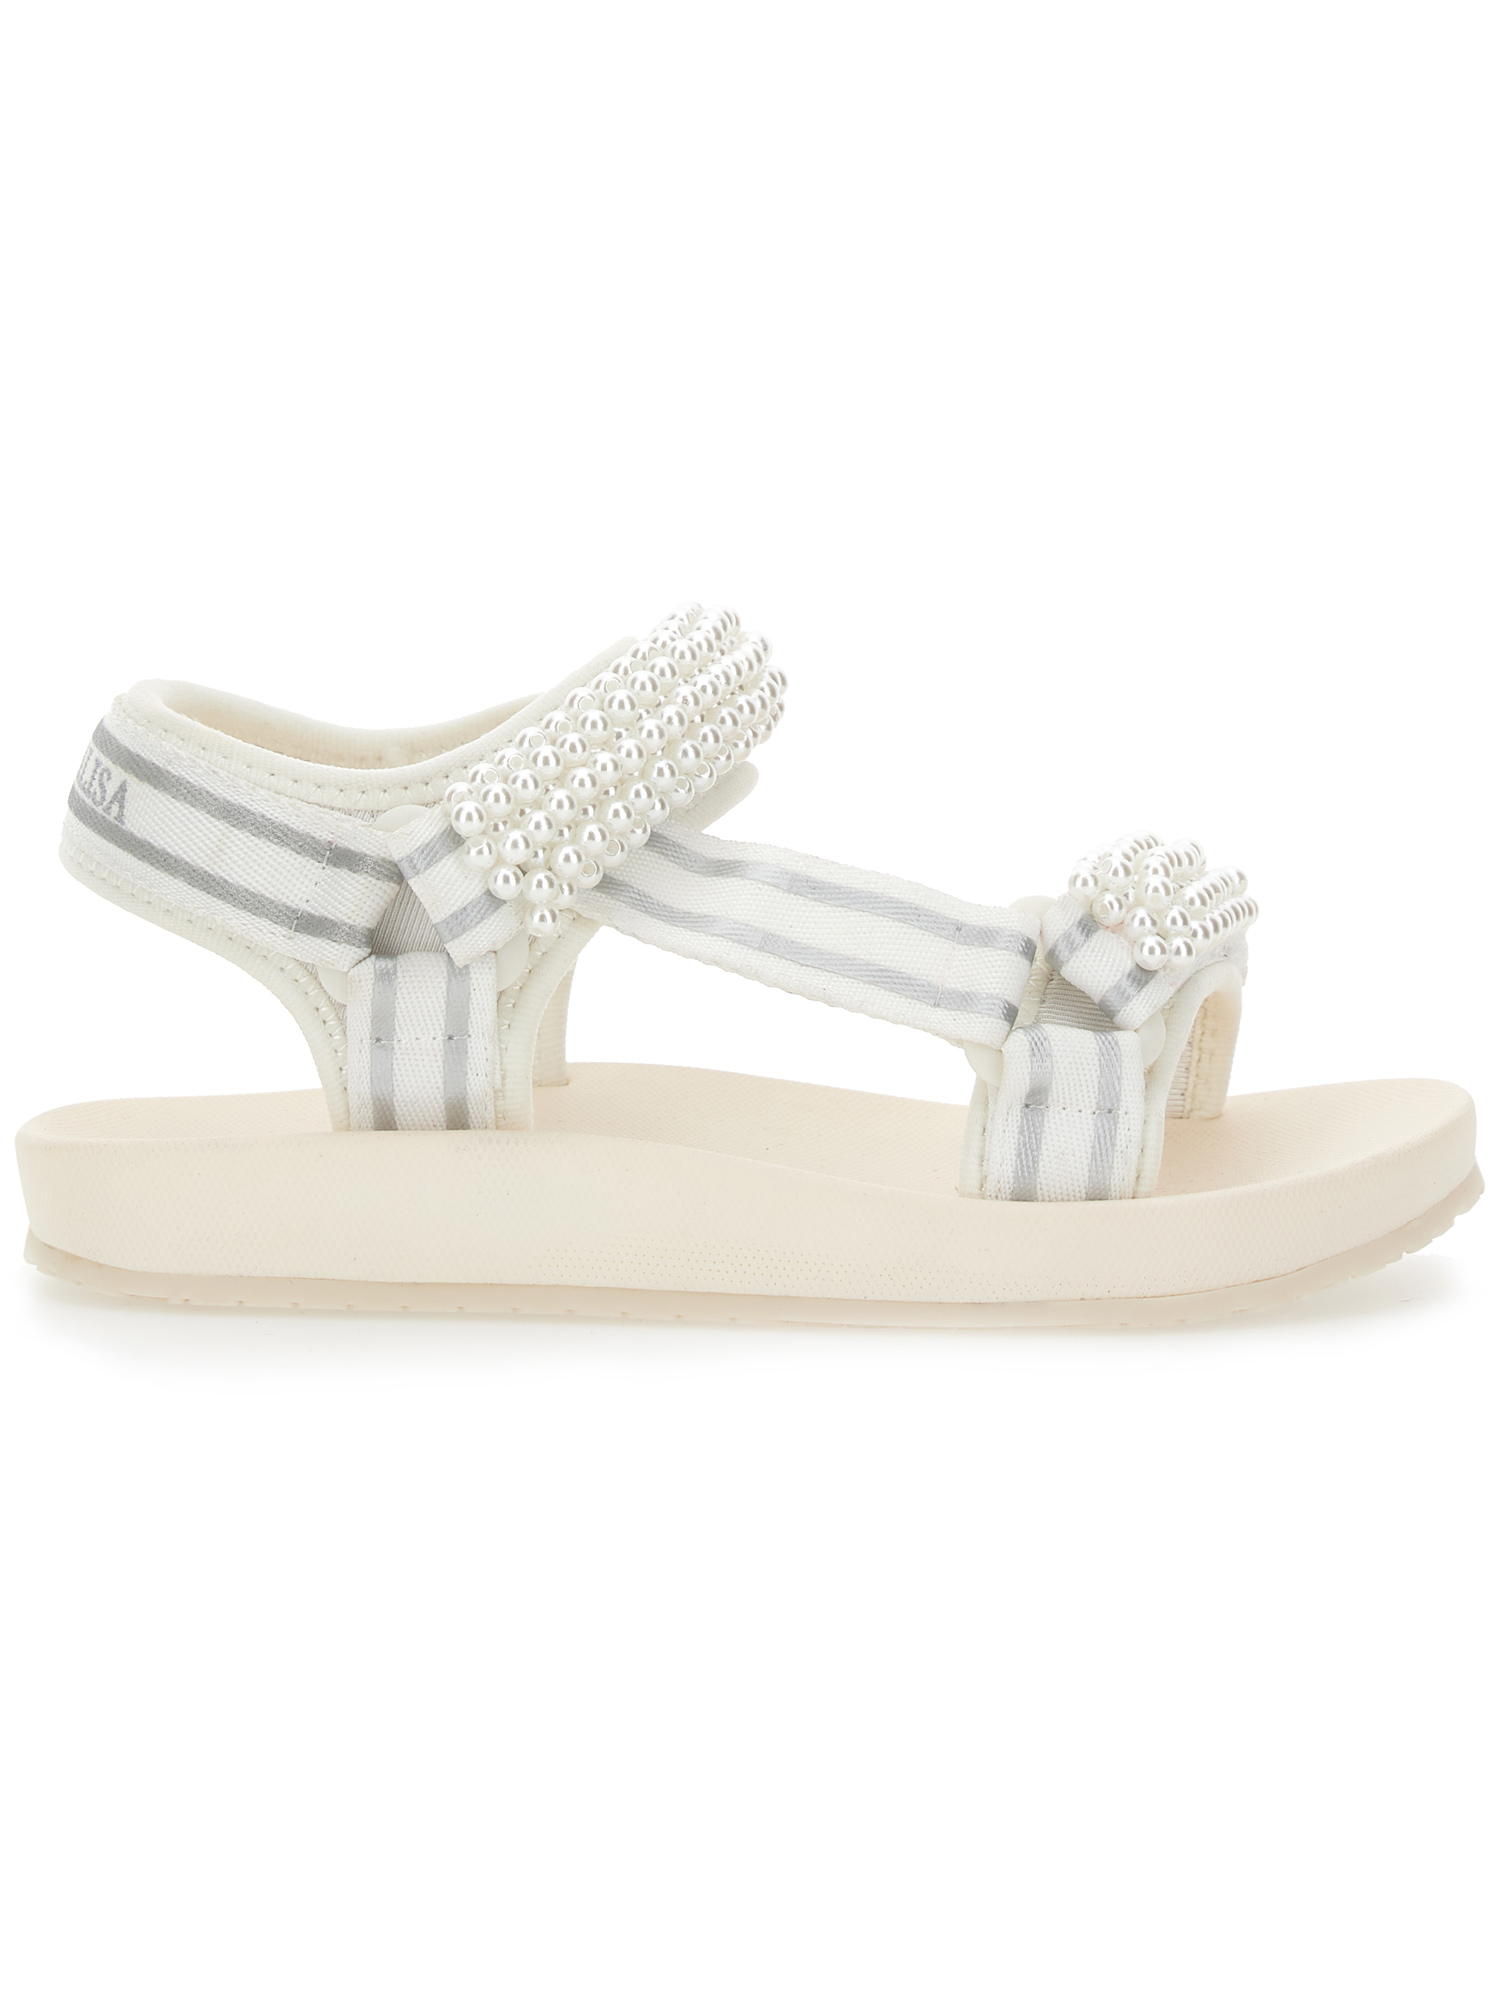 Monnalisa Hi-tech Sandals With Pearls In White